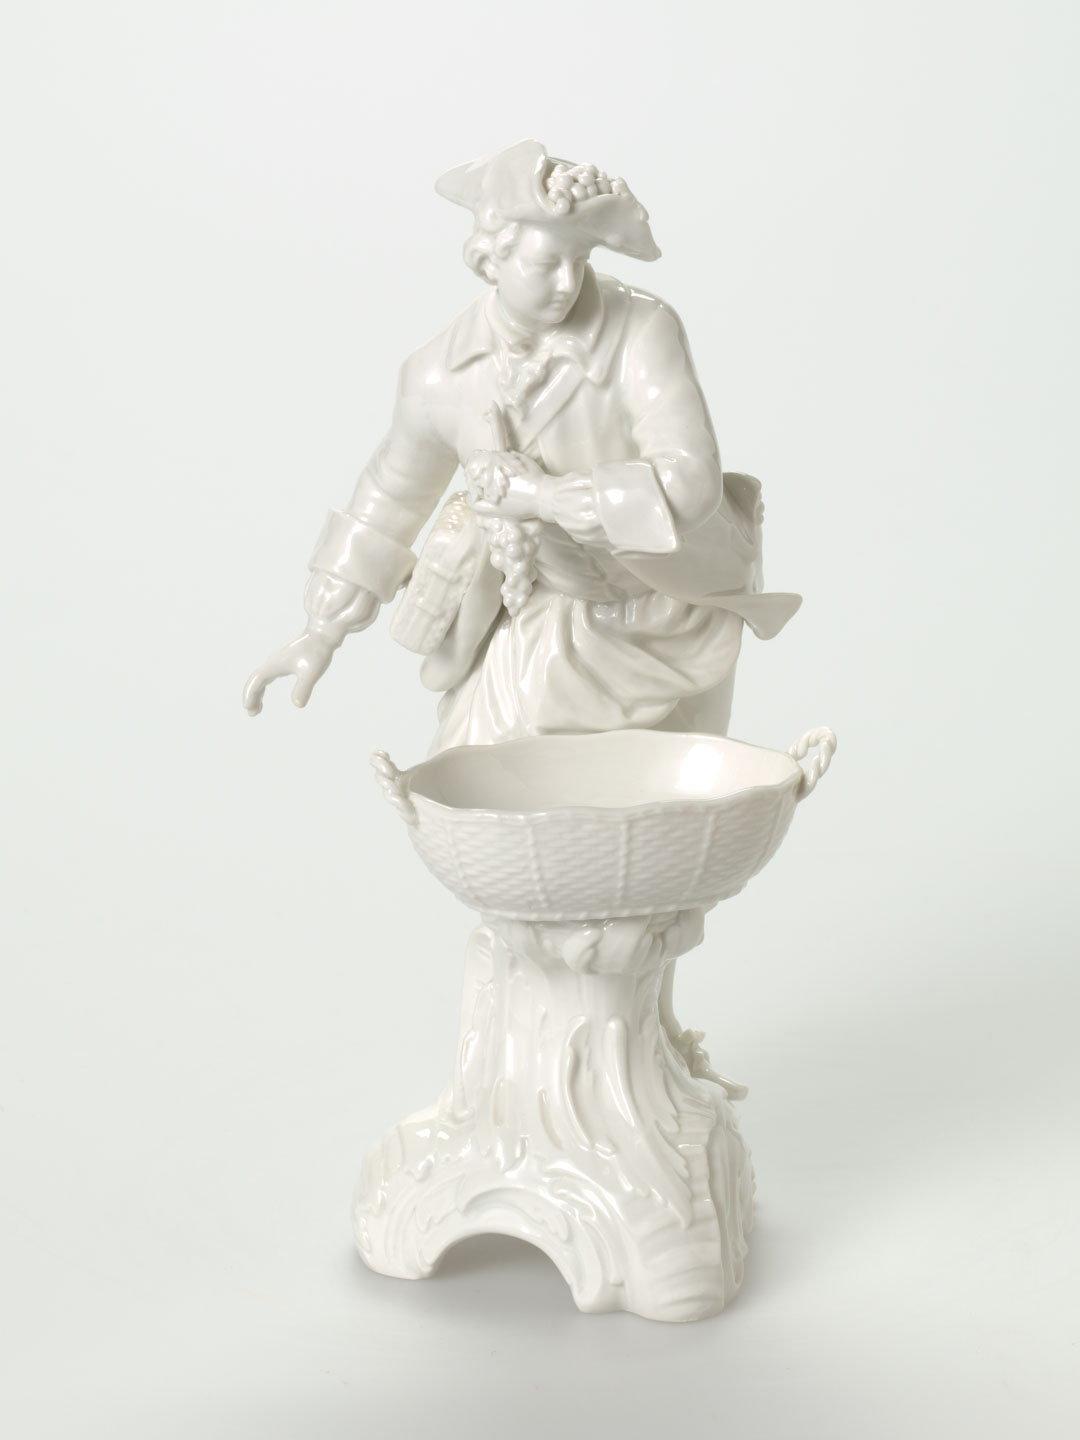 Artwork Figurine:  (gallant holding a bunch of grapes) this artwork made of Hard-paste porcelain finely modelled figure of a gallant holding a bunch of grapes over a basket, Rococo base and clear glaze, created in 1870-01-01